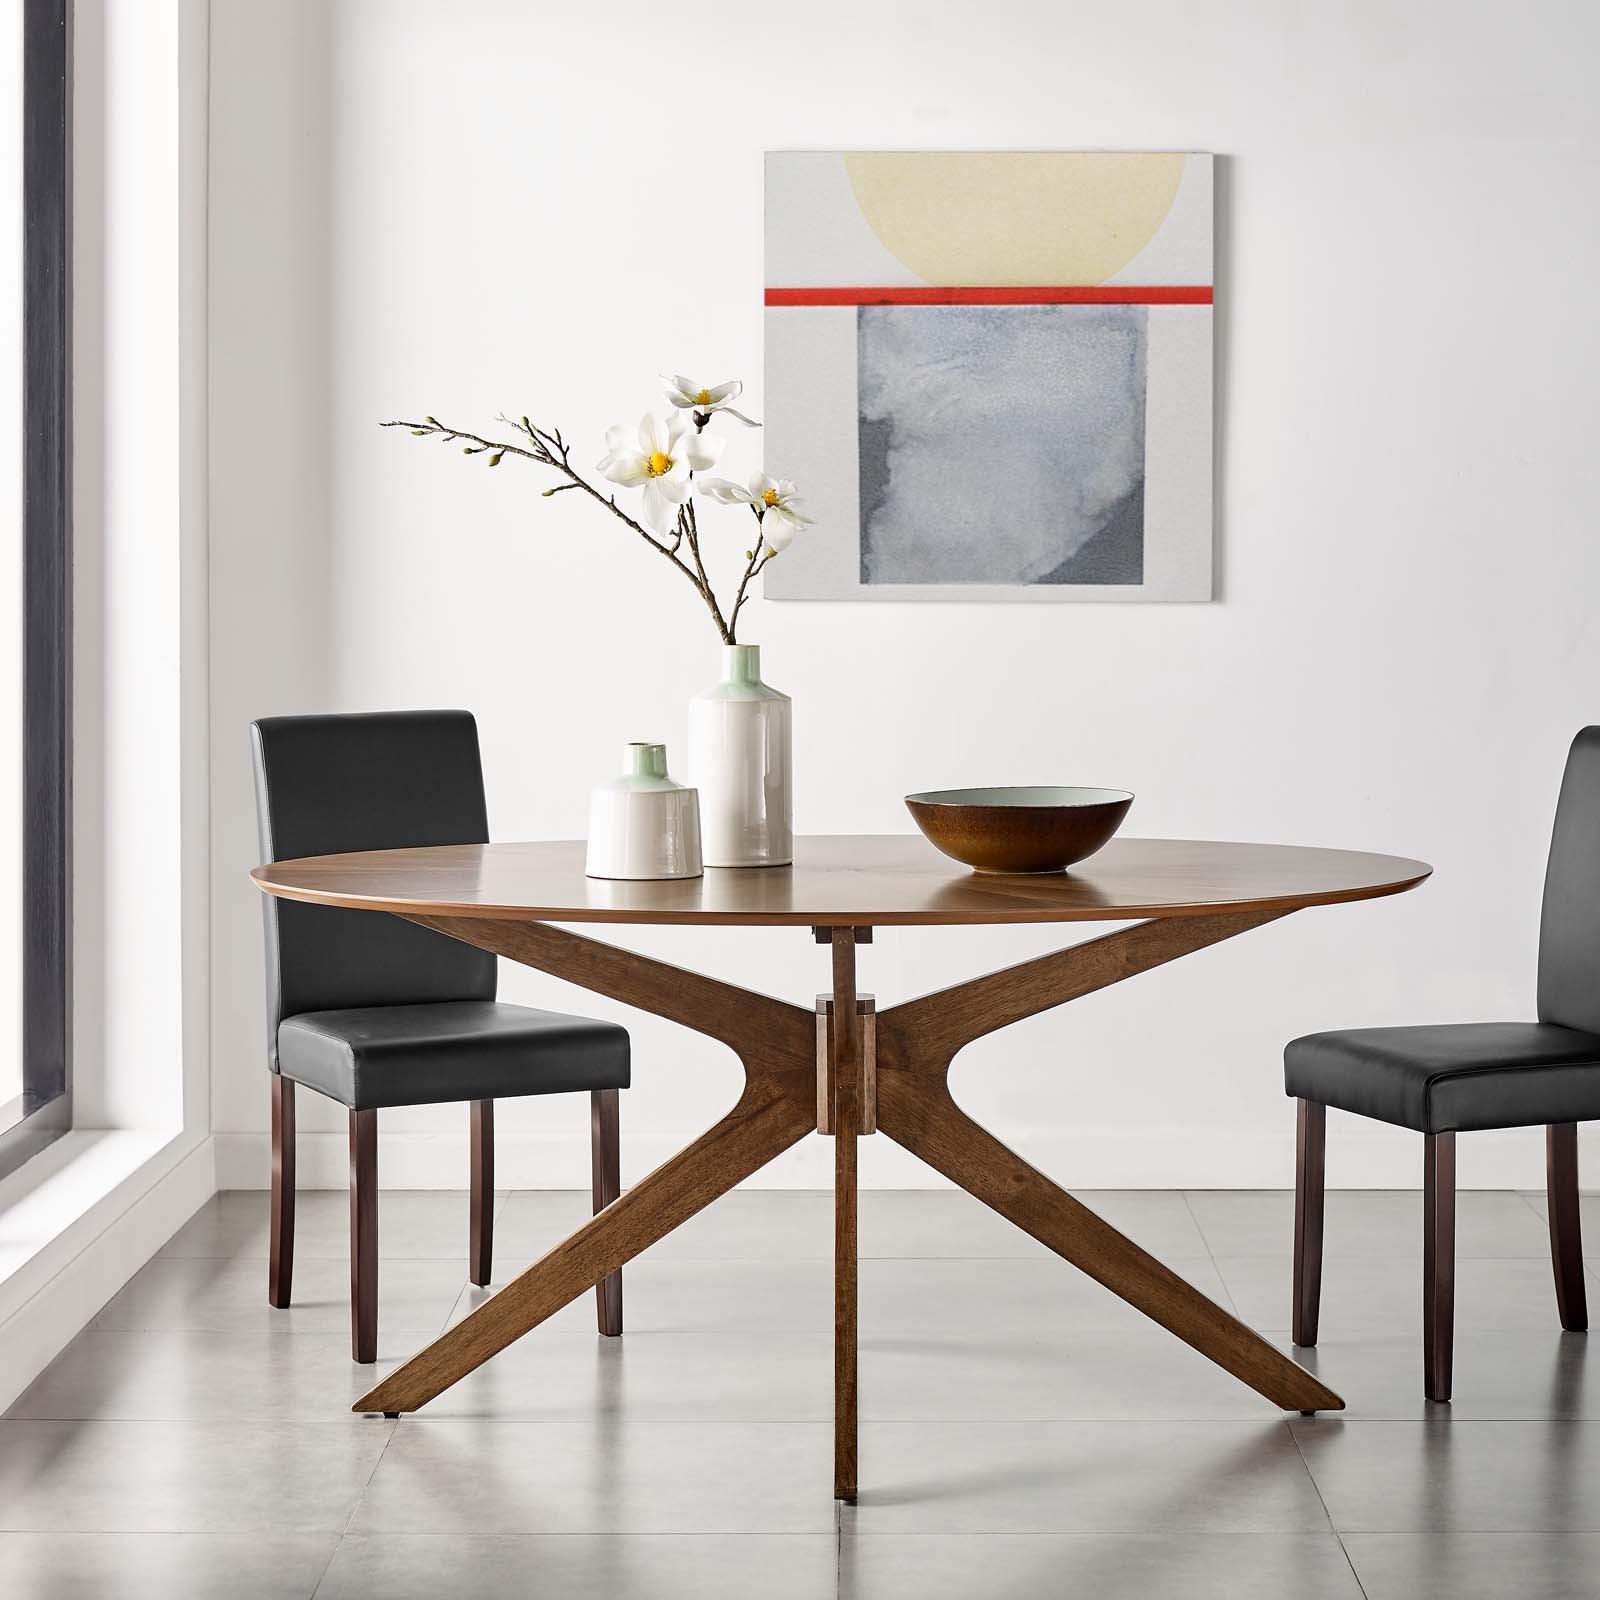 Crossroads 63" Oval Wood Dining Table - East Shore Modern Home Furnishings